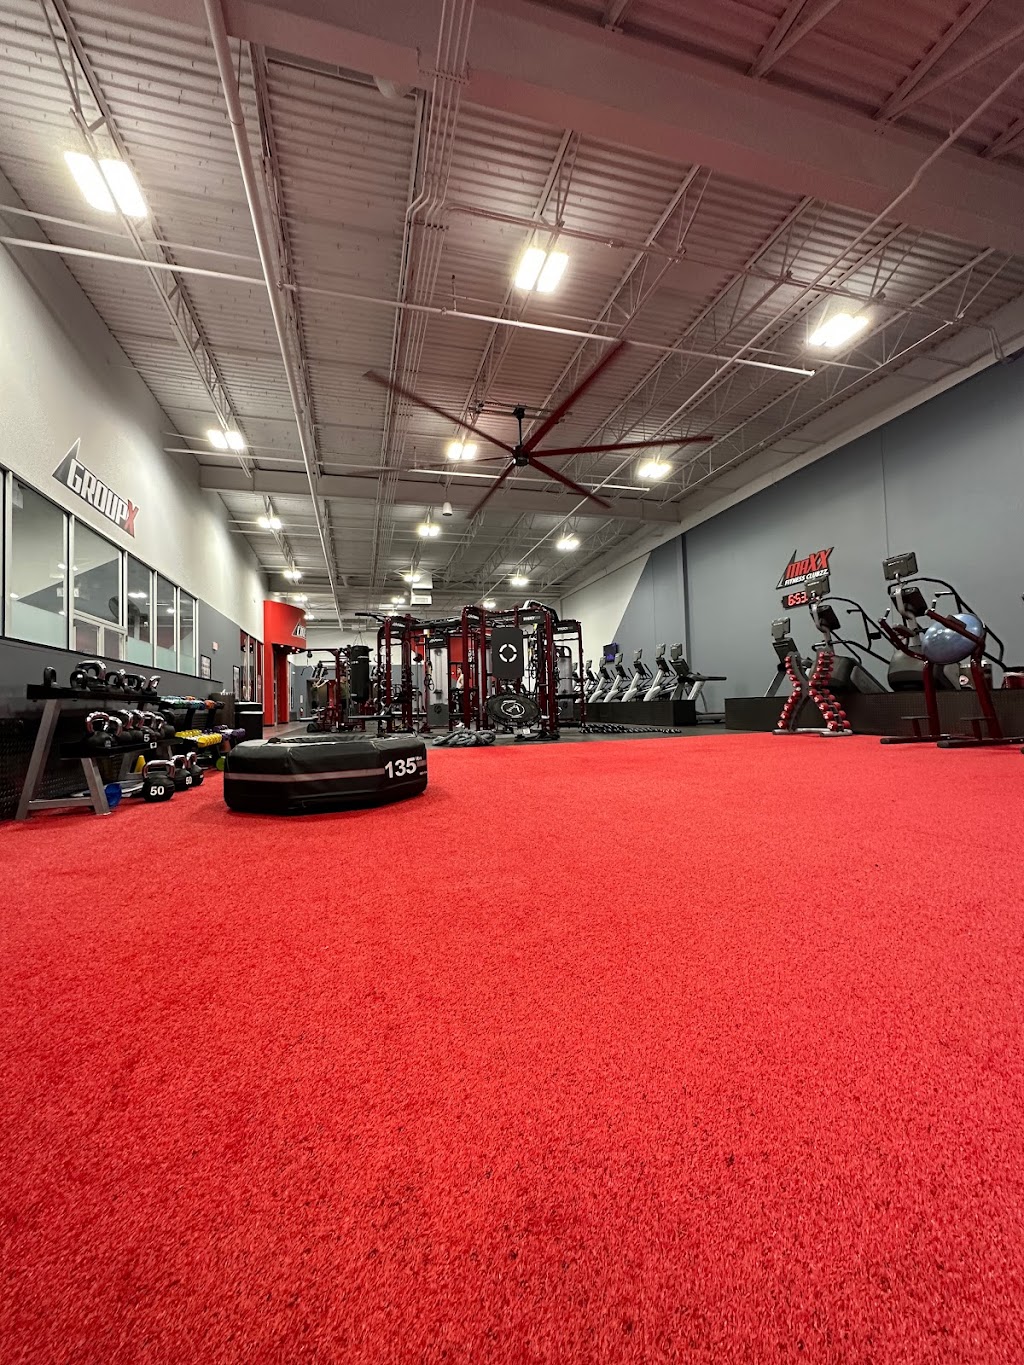 Maxx Fitness Clubzz | 223 N West End Blvd, Quakertown, PA 18951 | Phone: (215) 892-1202